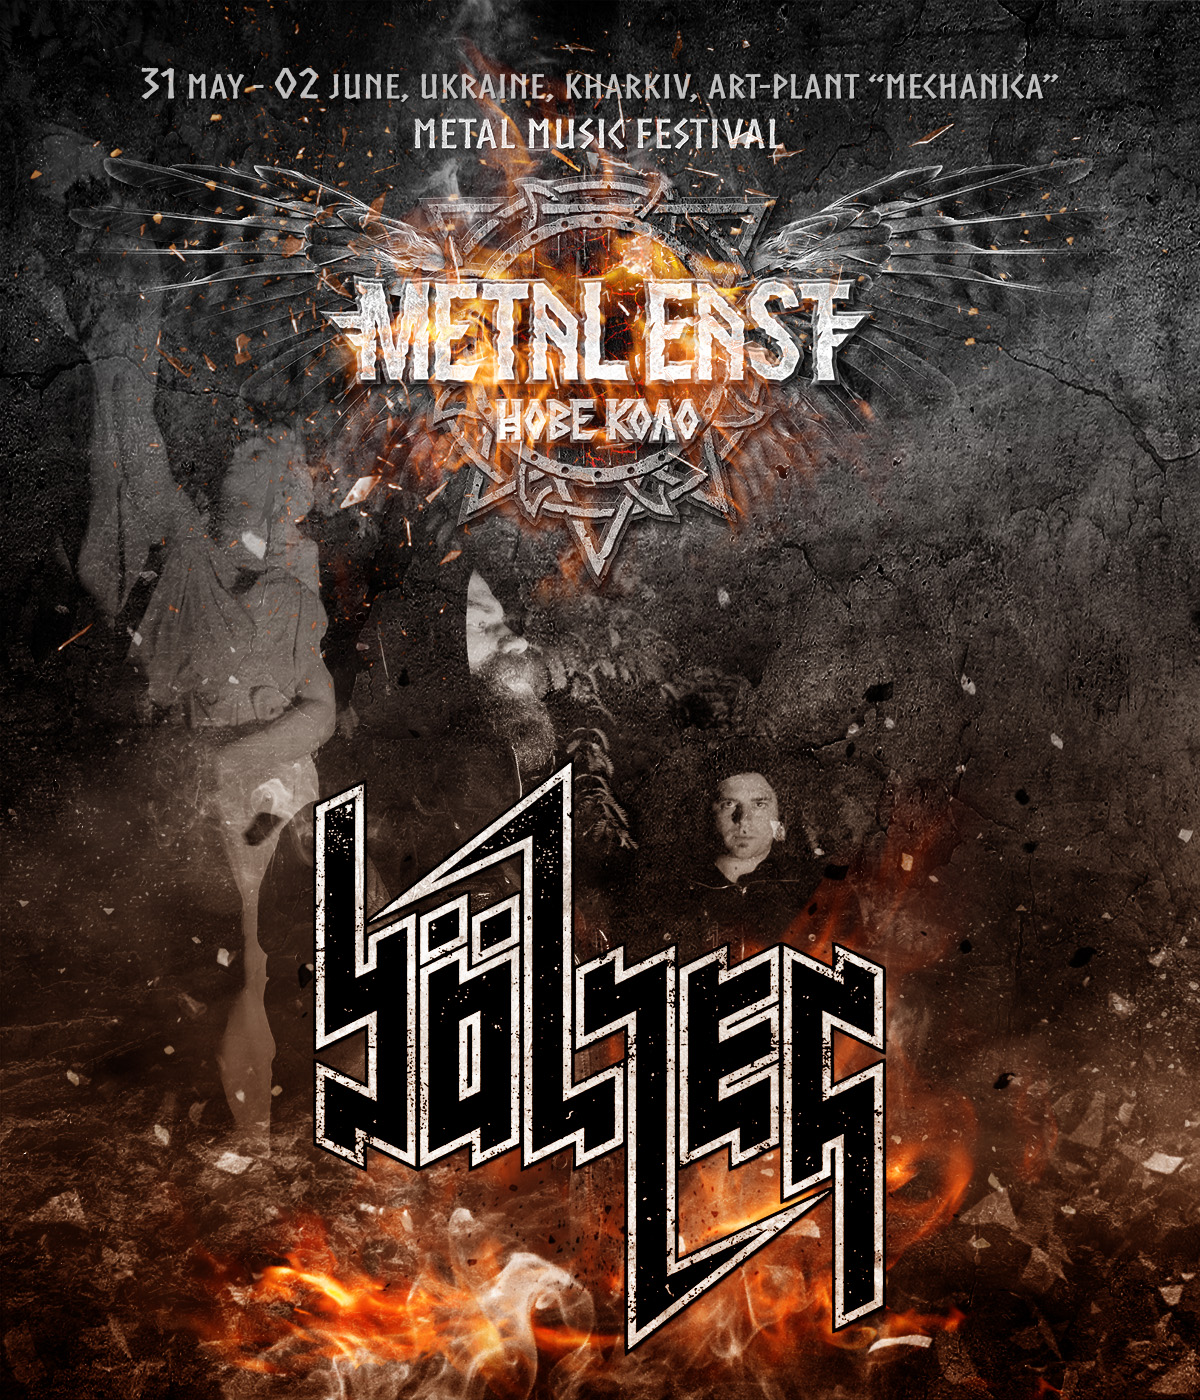 Join us at Metal East Nove Kolo festival in Kharkiv, Ukraine, from 31st of May to 2nd of June 2019 to see the BOLZER show